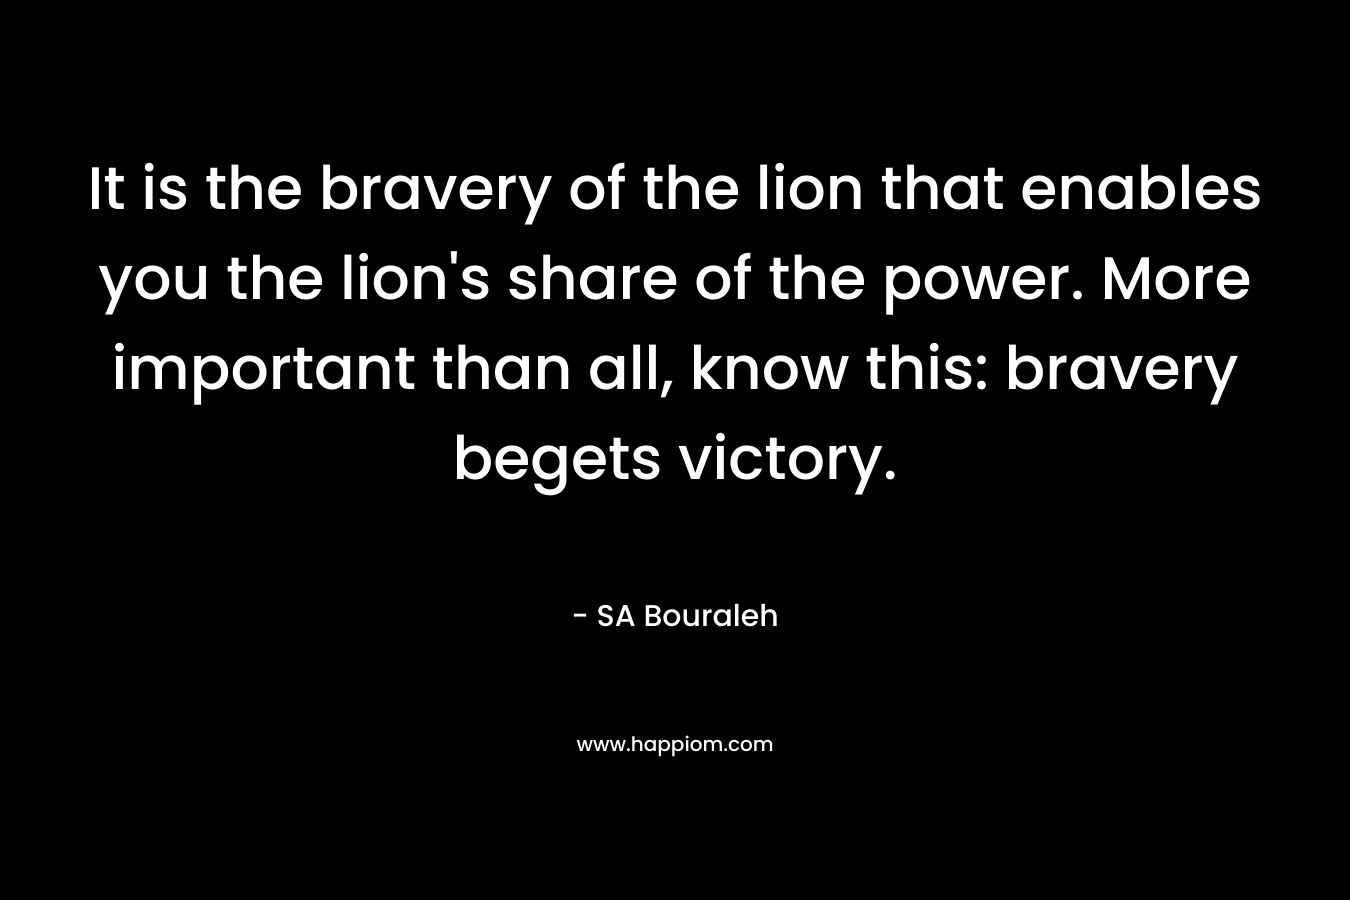 It is the bravery of the lion that enables you the lion's share of the power. More important than all, know this: bravery begets victory.